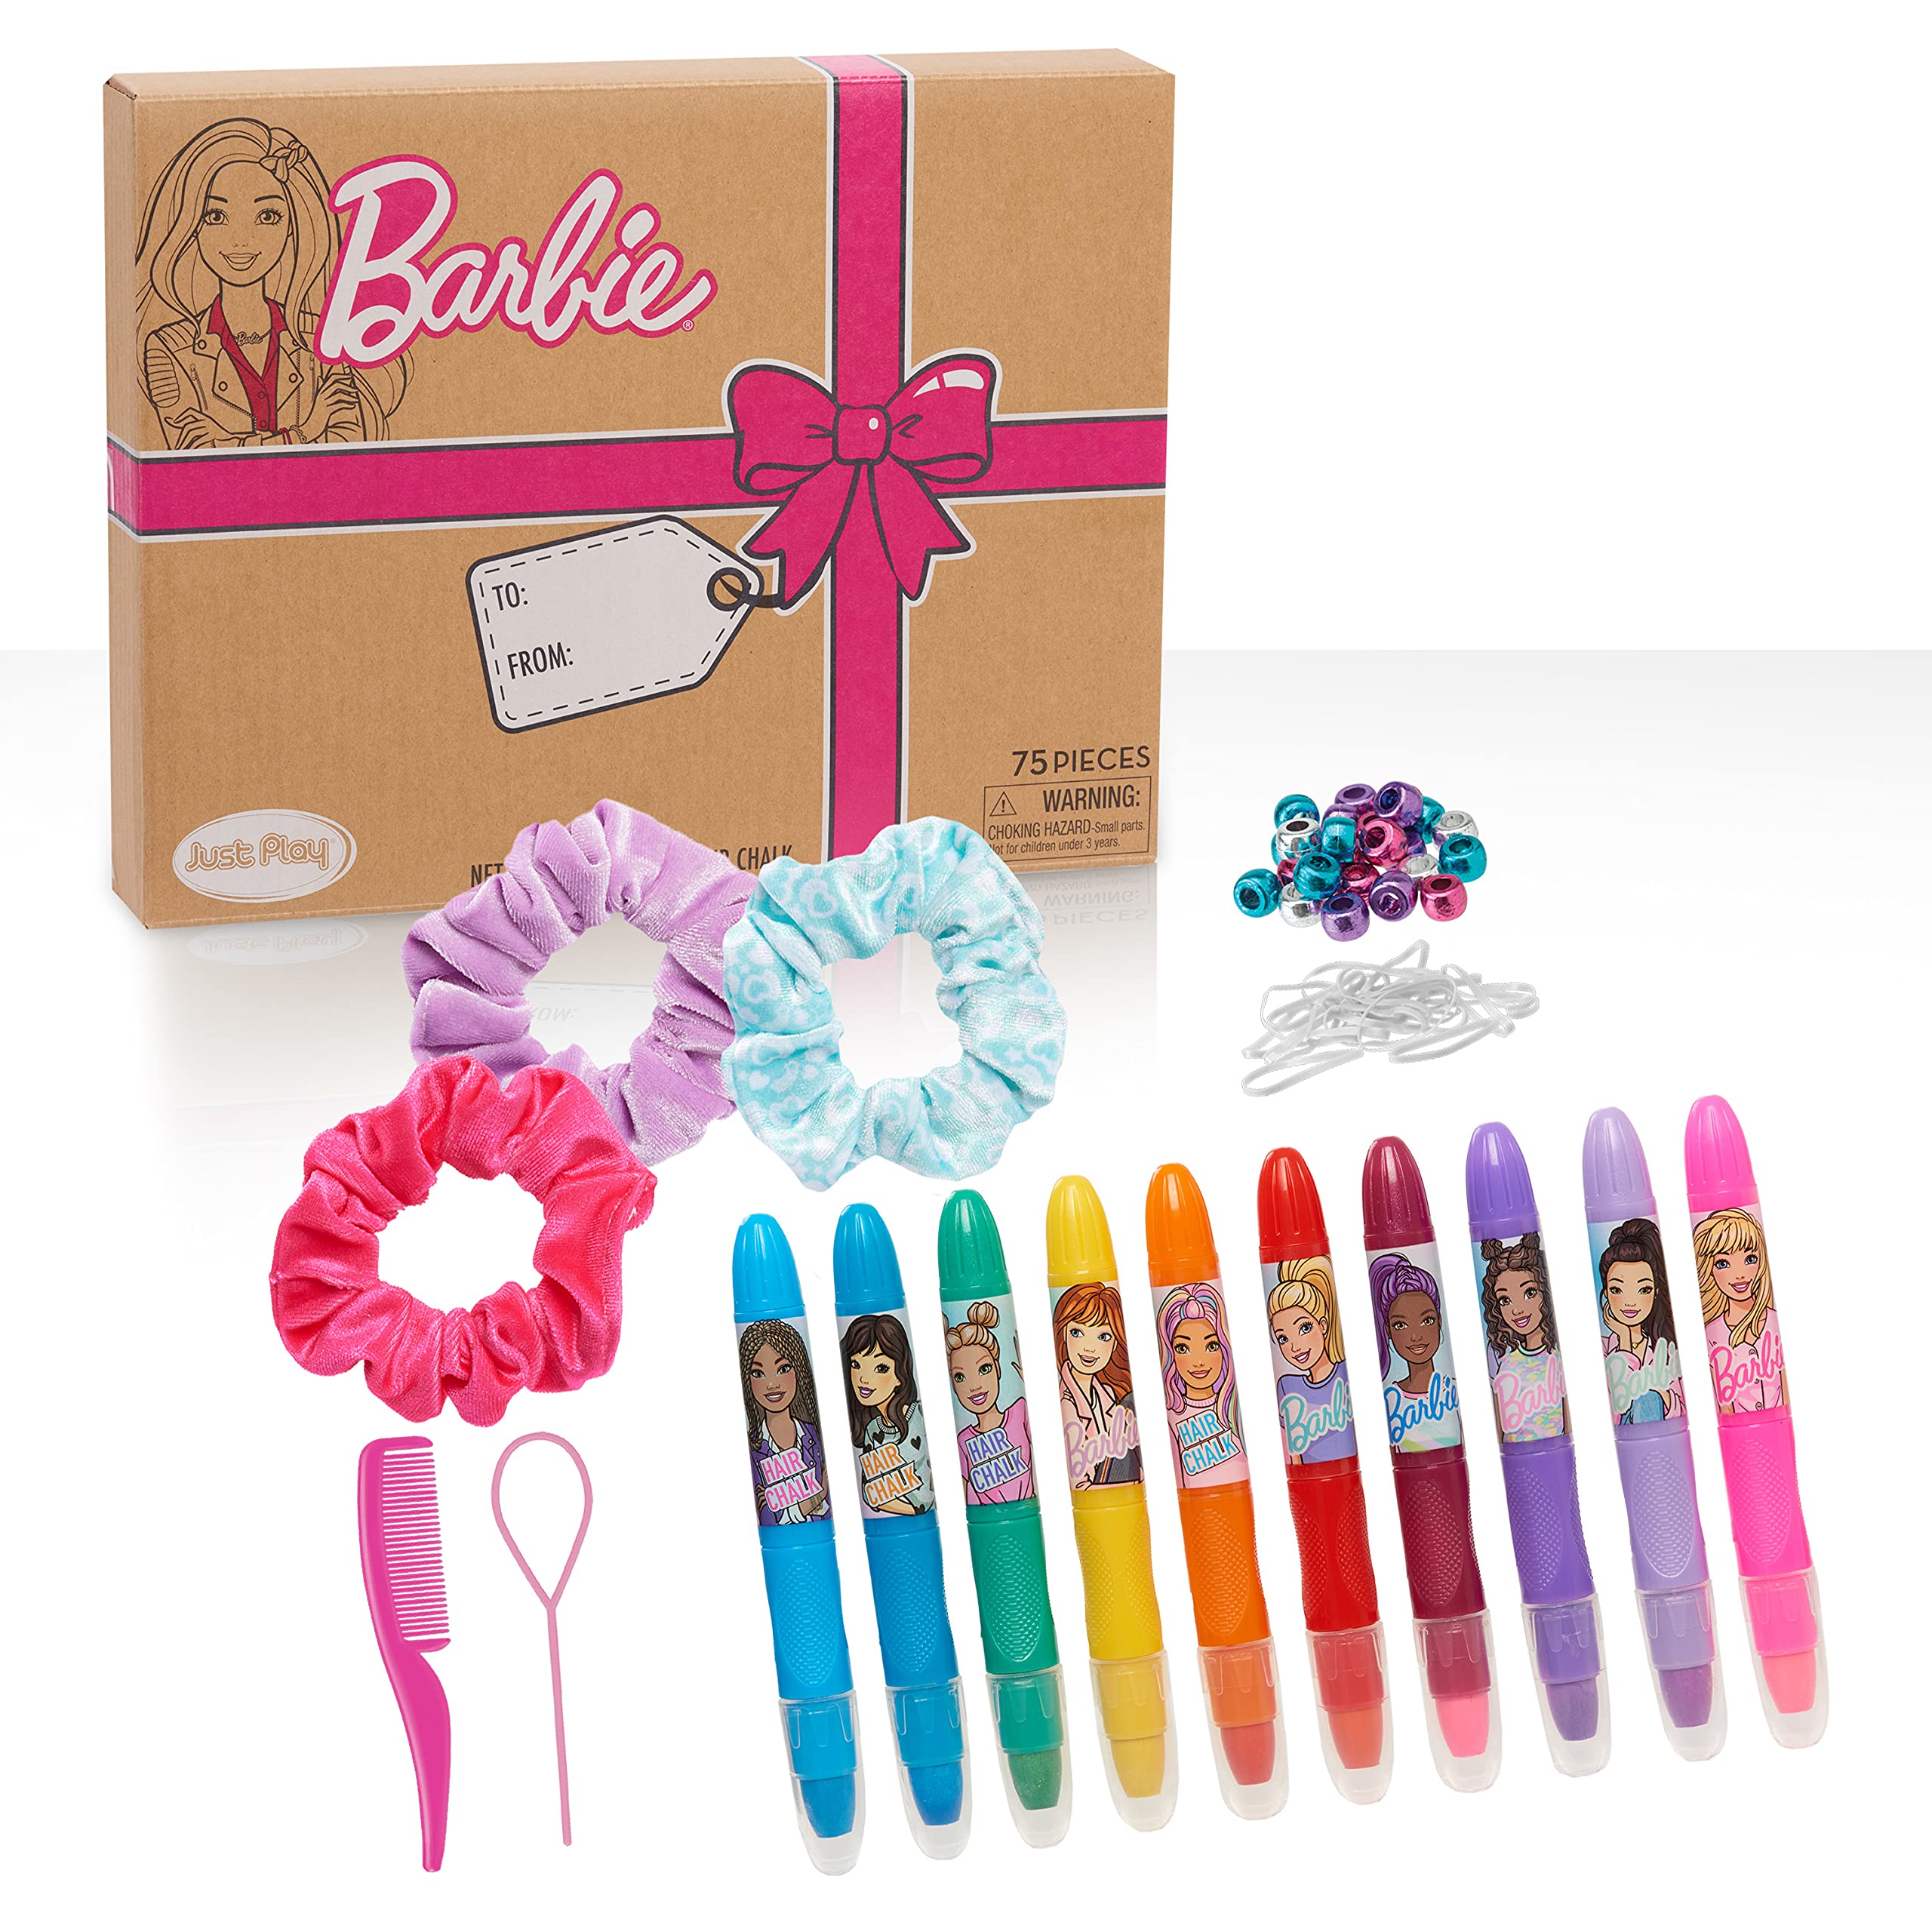 75-Piece Just Play Barbie Deluxe Hair Chalk Salon Set w/ Scrunchies, Hair Beads & Tools $5.65 + Free Shipping w/ Prime or on $25+